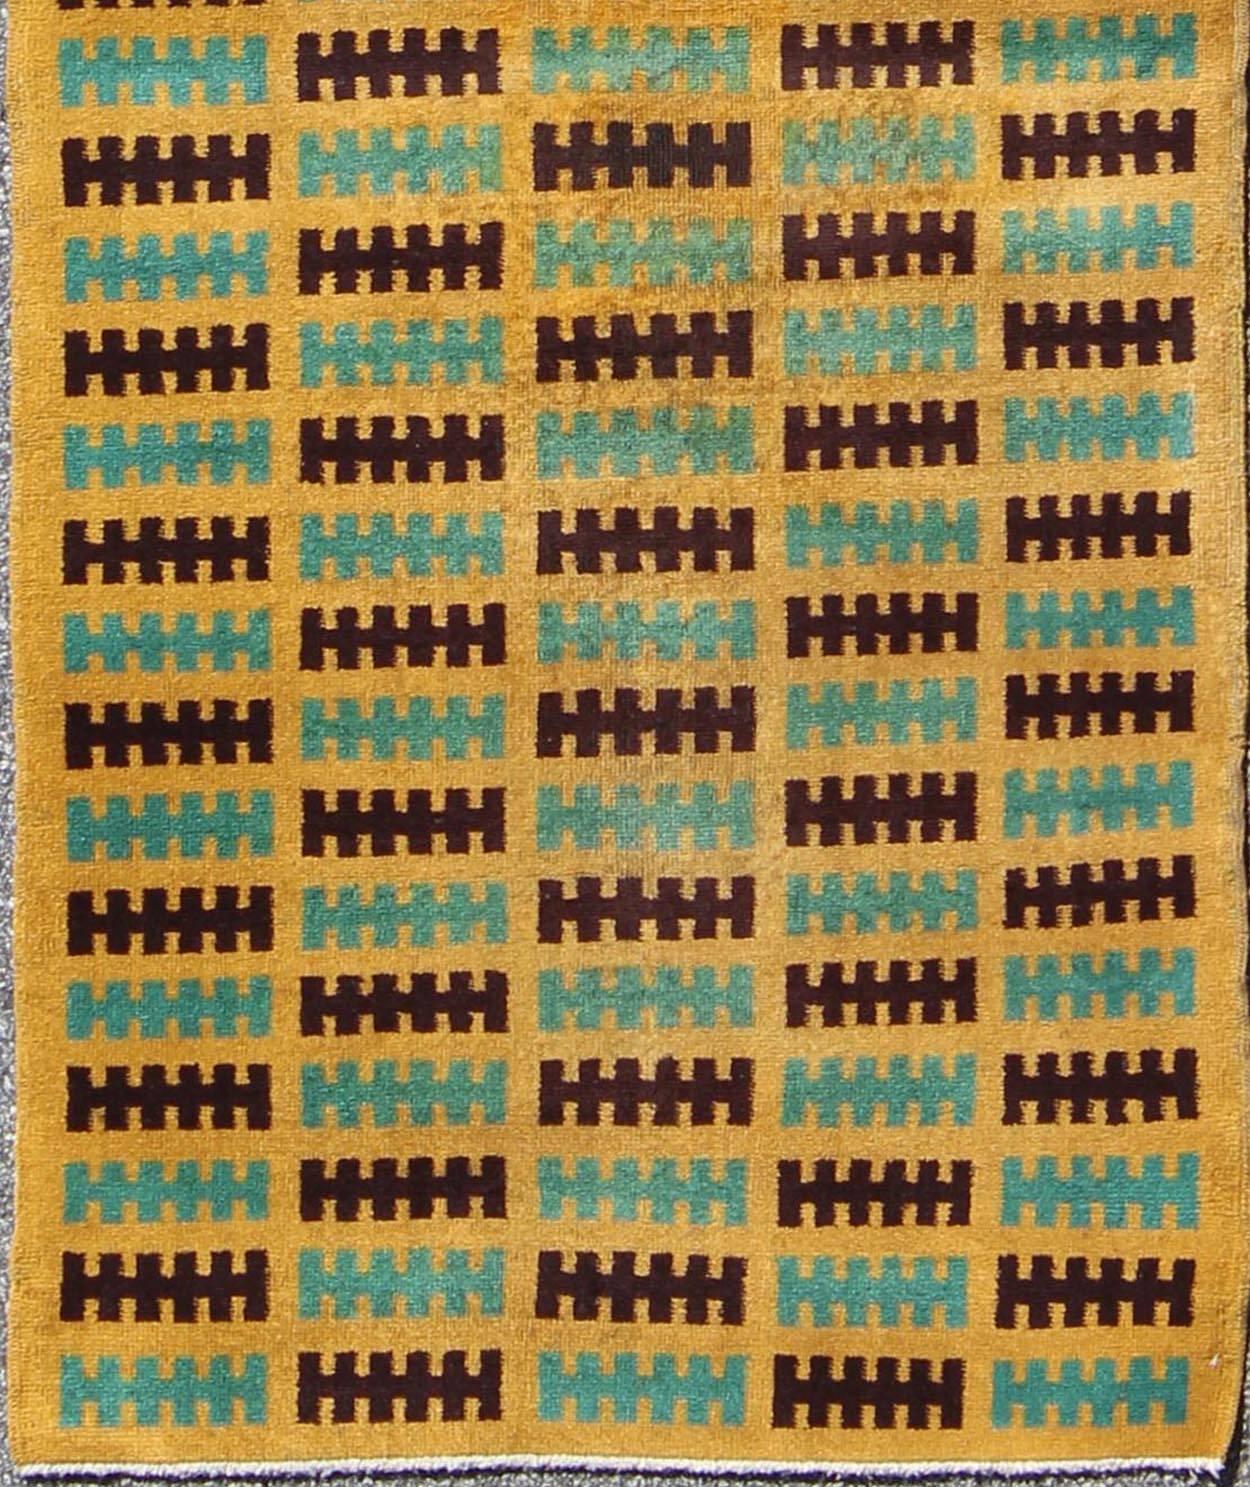 Mid-Century Modern Turkish Runner in Gold, Black and Teal Blue.
Famous Turkish artist, Zeki Müren, designed a group of neo-Baroque-styled award-winning rugs and carpets. Deriving inspiration from both Zeki Müren’s creative imagination and the Art